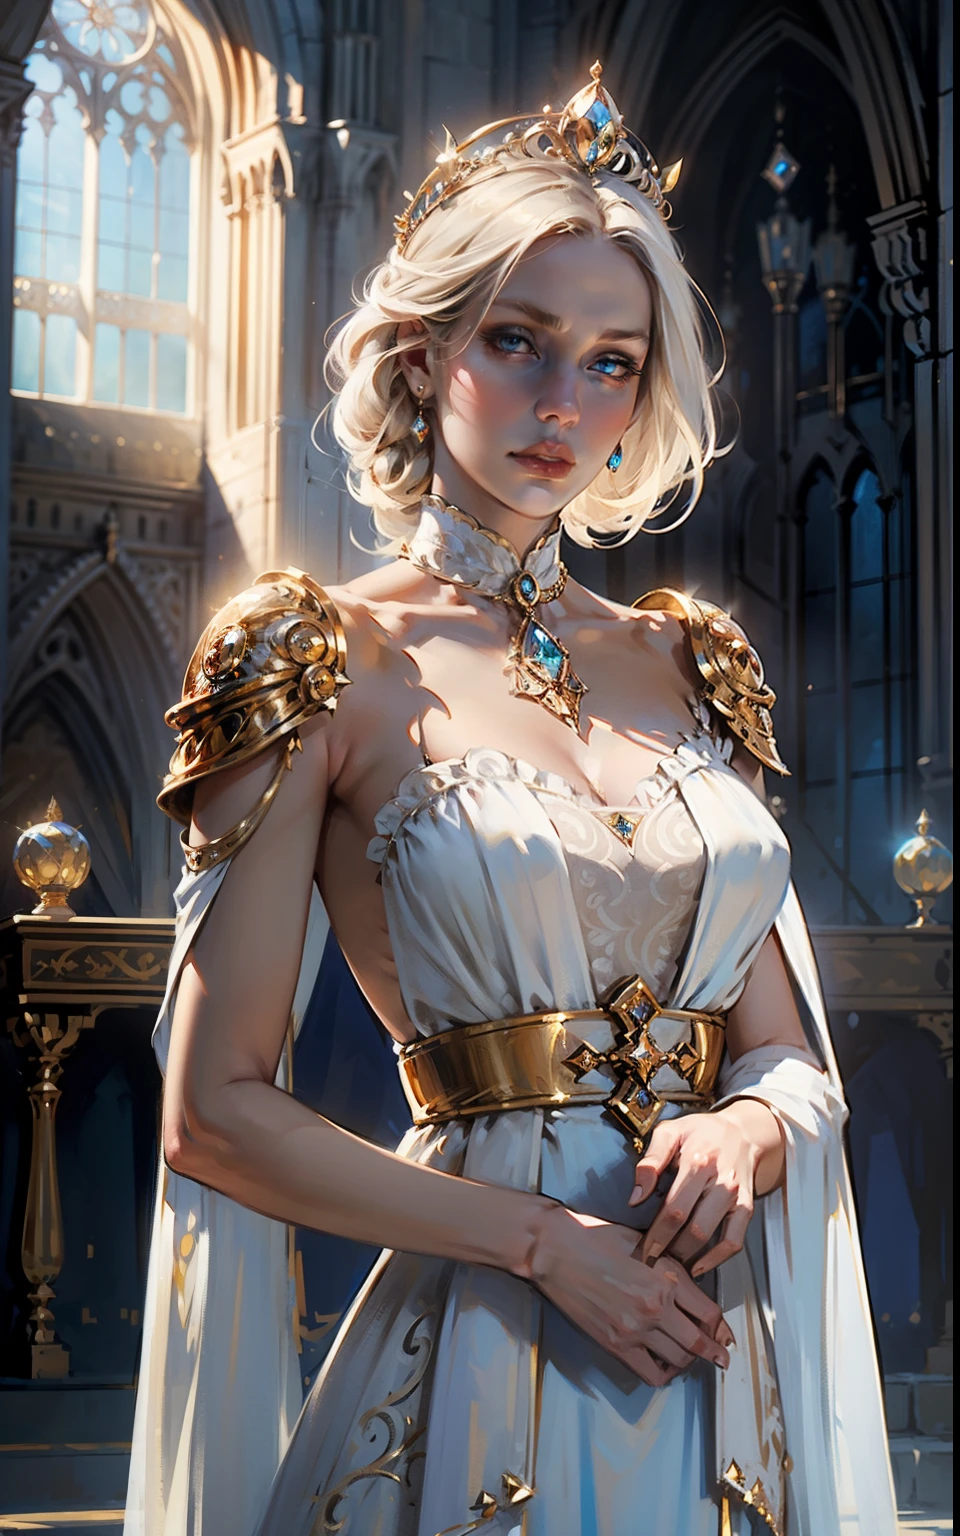 Fantasy, 19th century, empress, woman, delicate face, pale blonde hair, blue eyes, in a white royal dress with open shoulders, gold patterns on fabric, crystal jewelry, with a scarlet ribbon over the shoulder with the regalia of the monarch, Gothic castle made of white stone on the background, light, day, hd